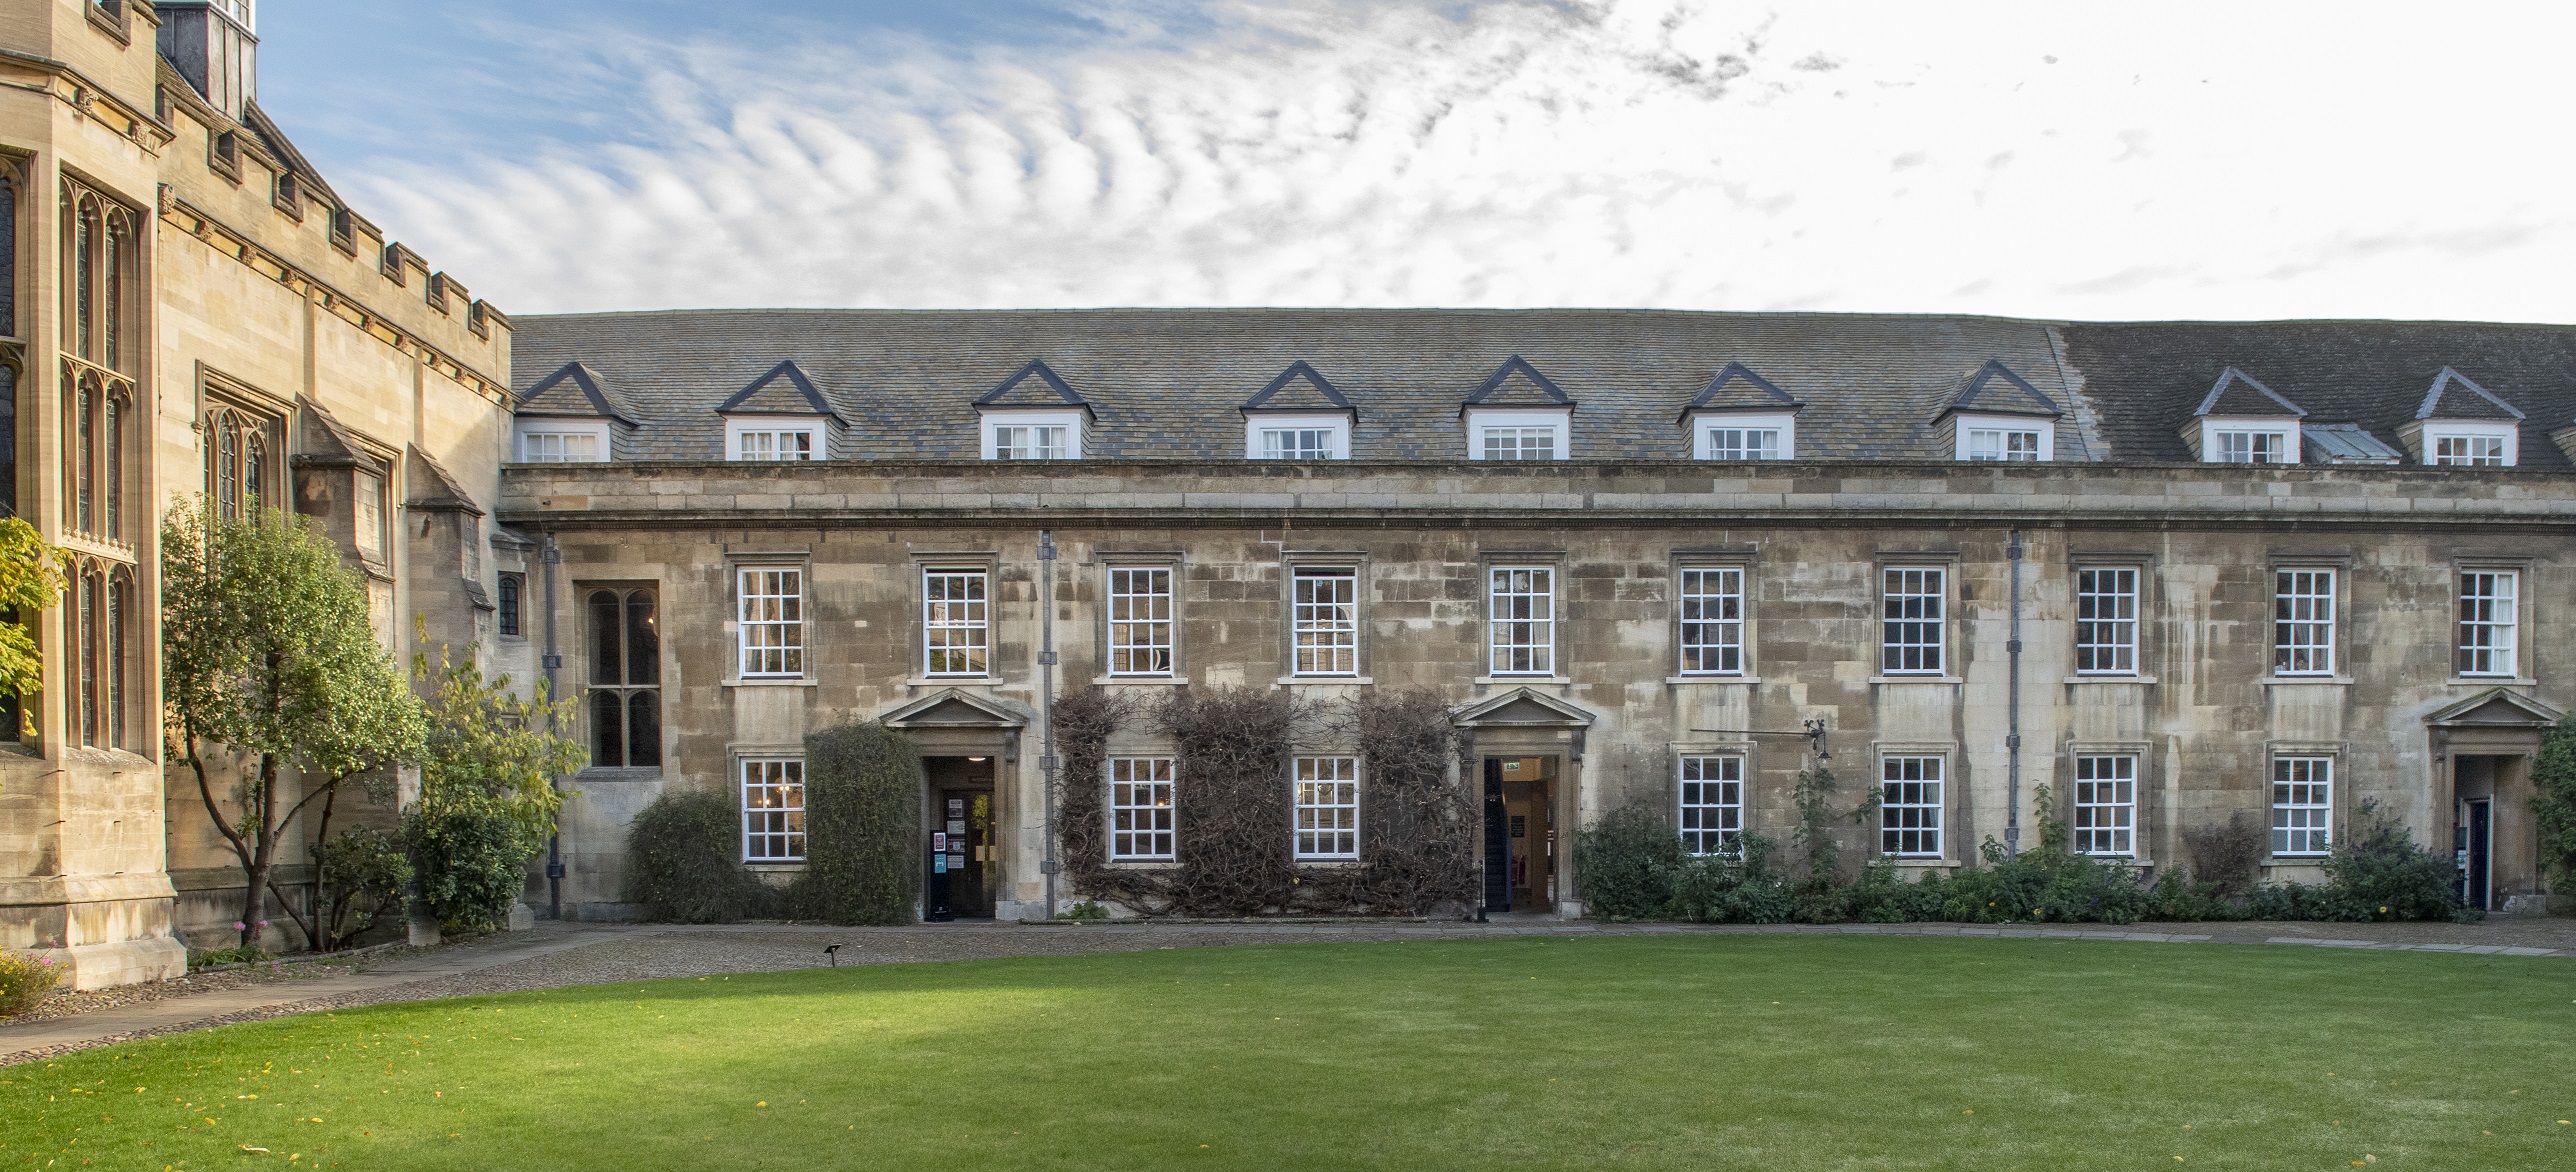 Delivering income and capital growth for Christ’s College, Cambridge for over 25 years